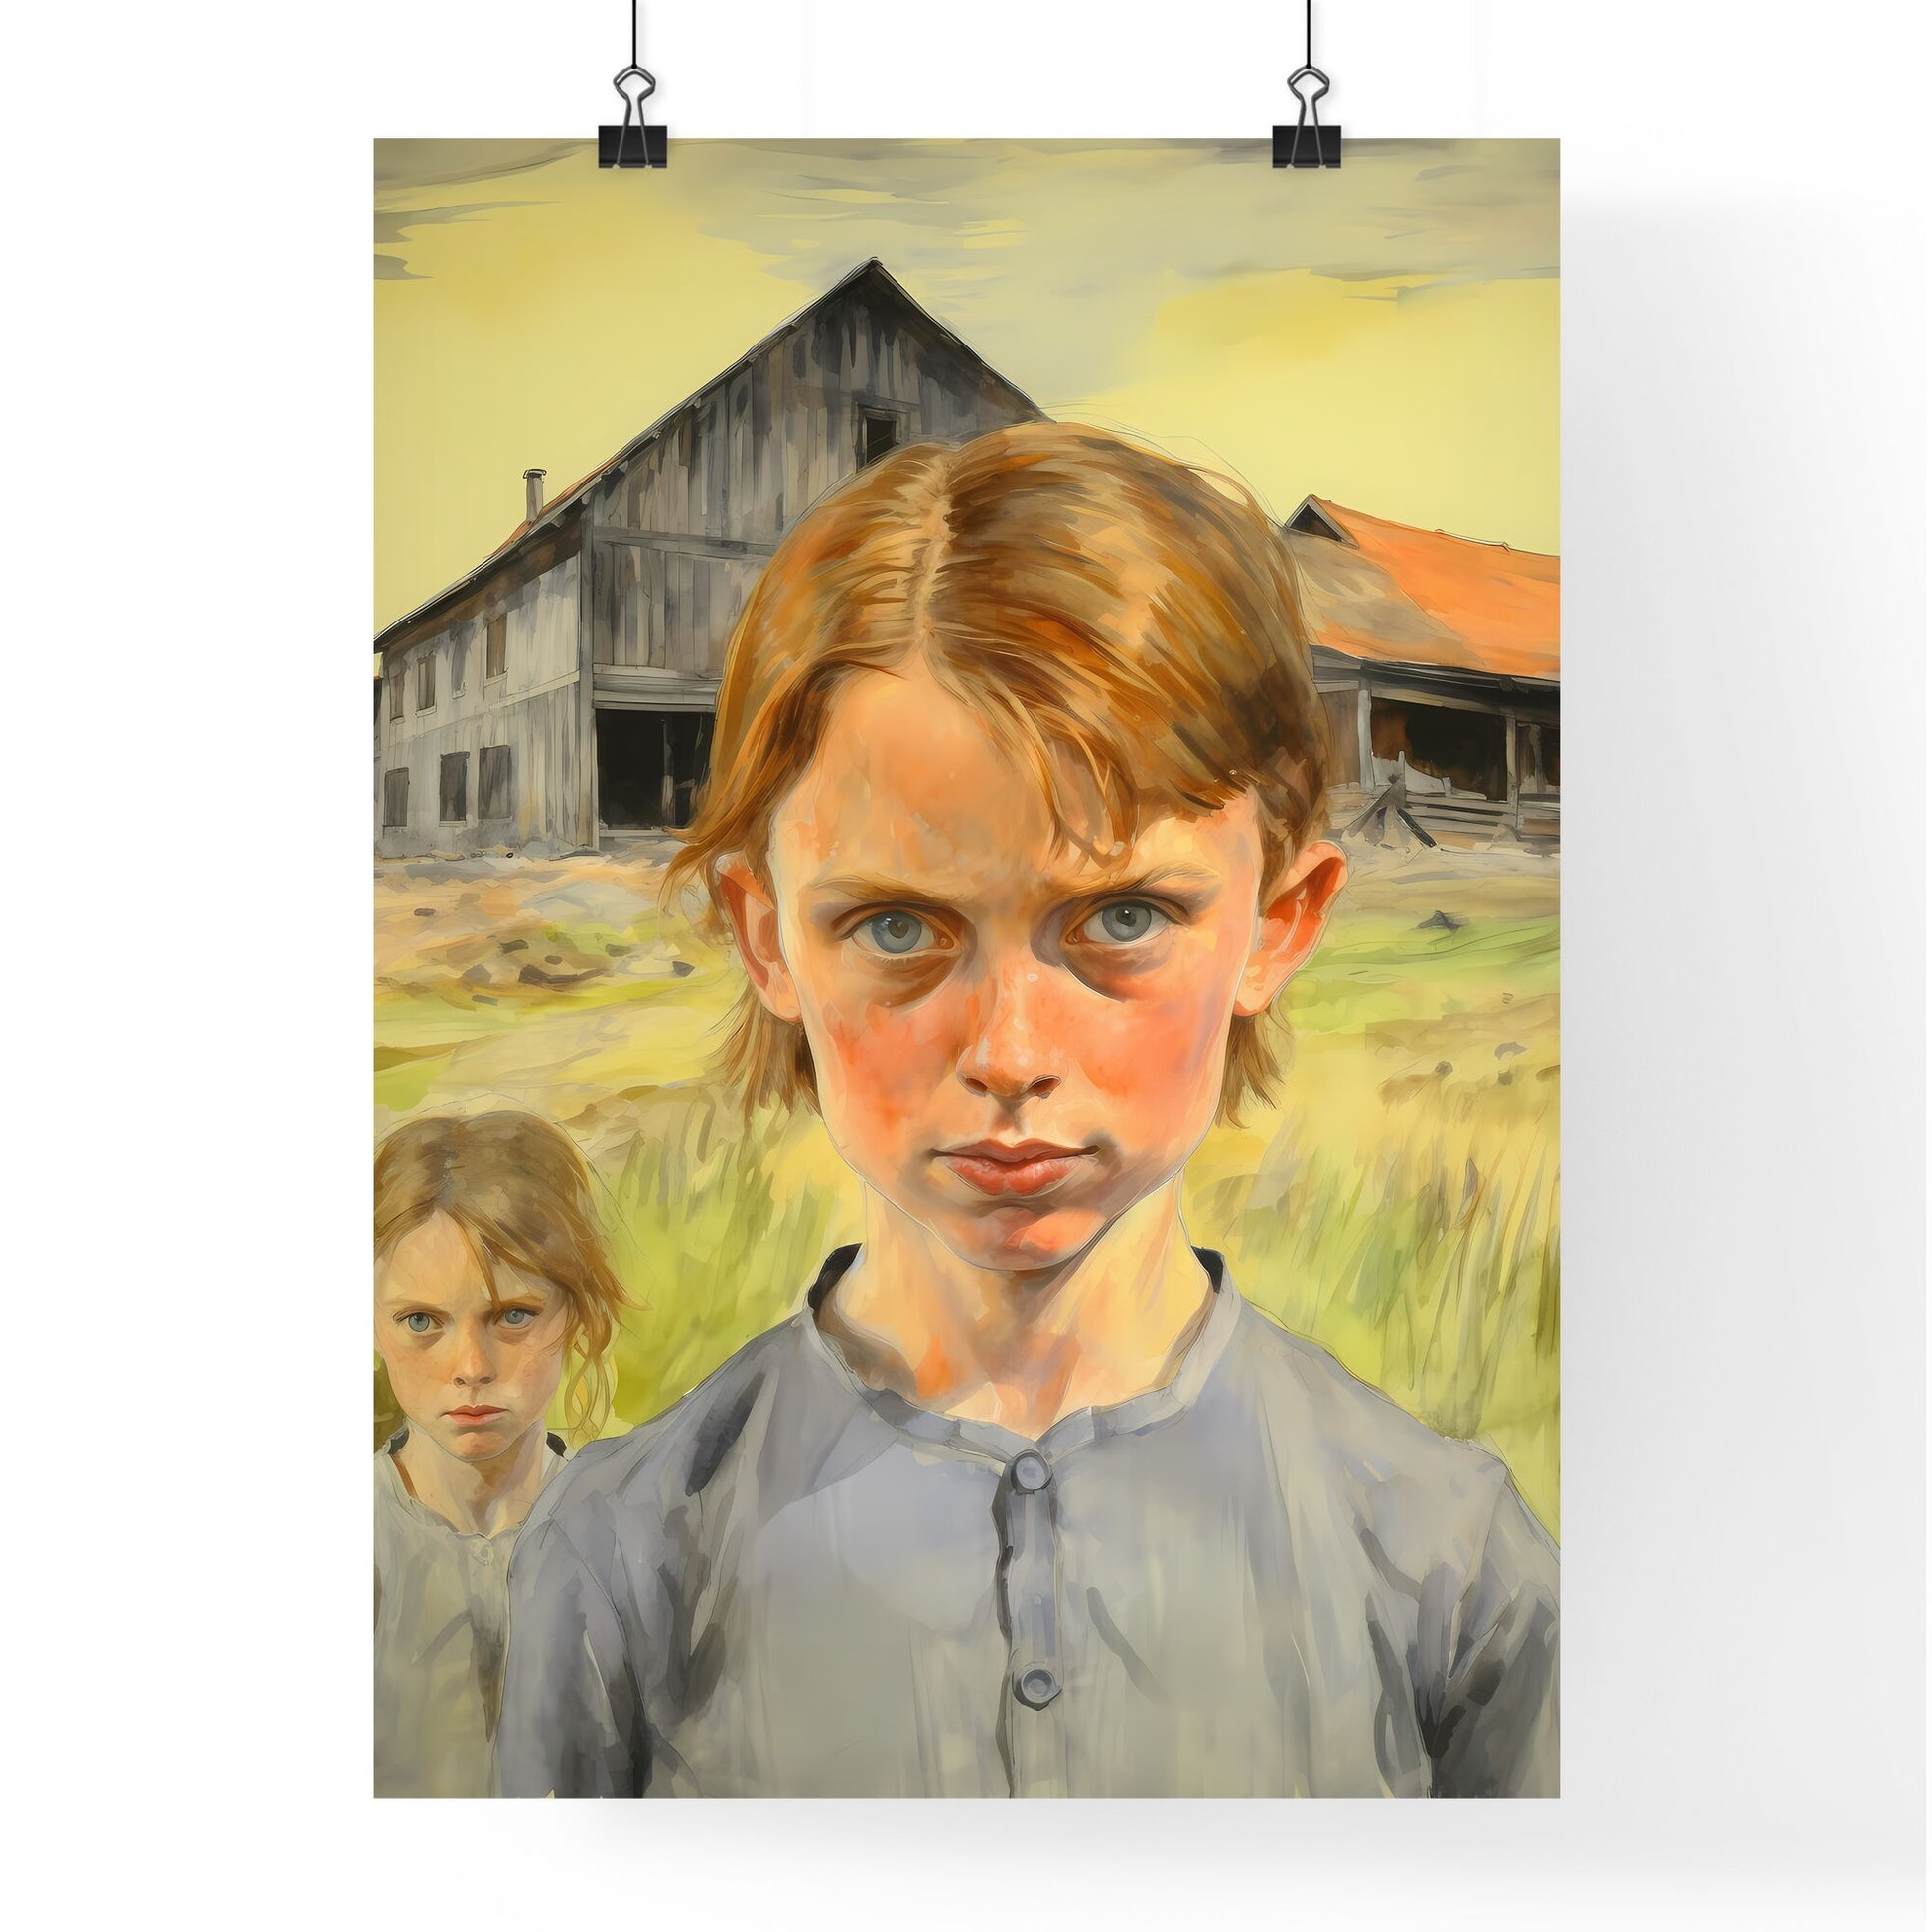 A Poster of In a country side - A Girl Looking At The Camera Default Title